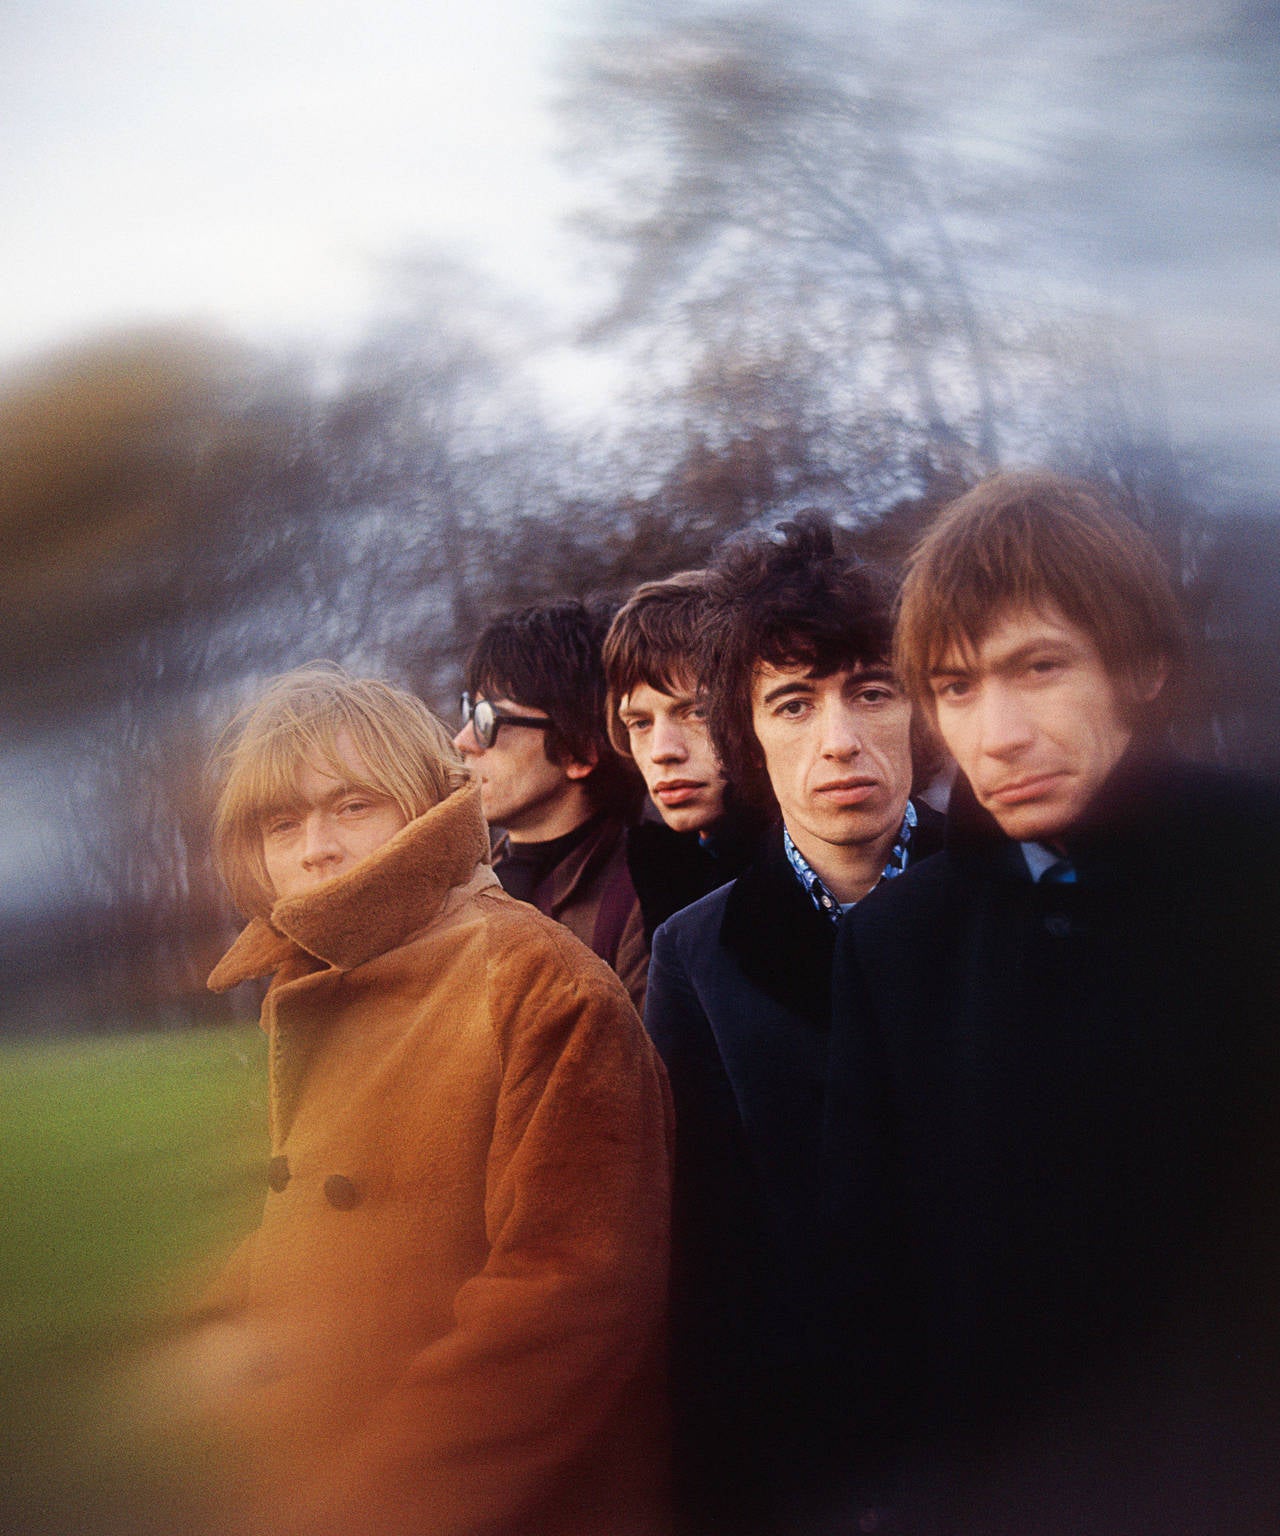 Gered Mankowitz Portrait Photograph - The Rolling Stones - Primrose Hill Beyond the Buttons